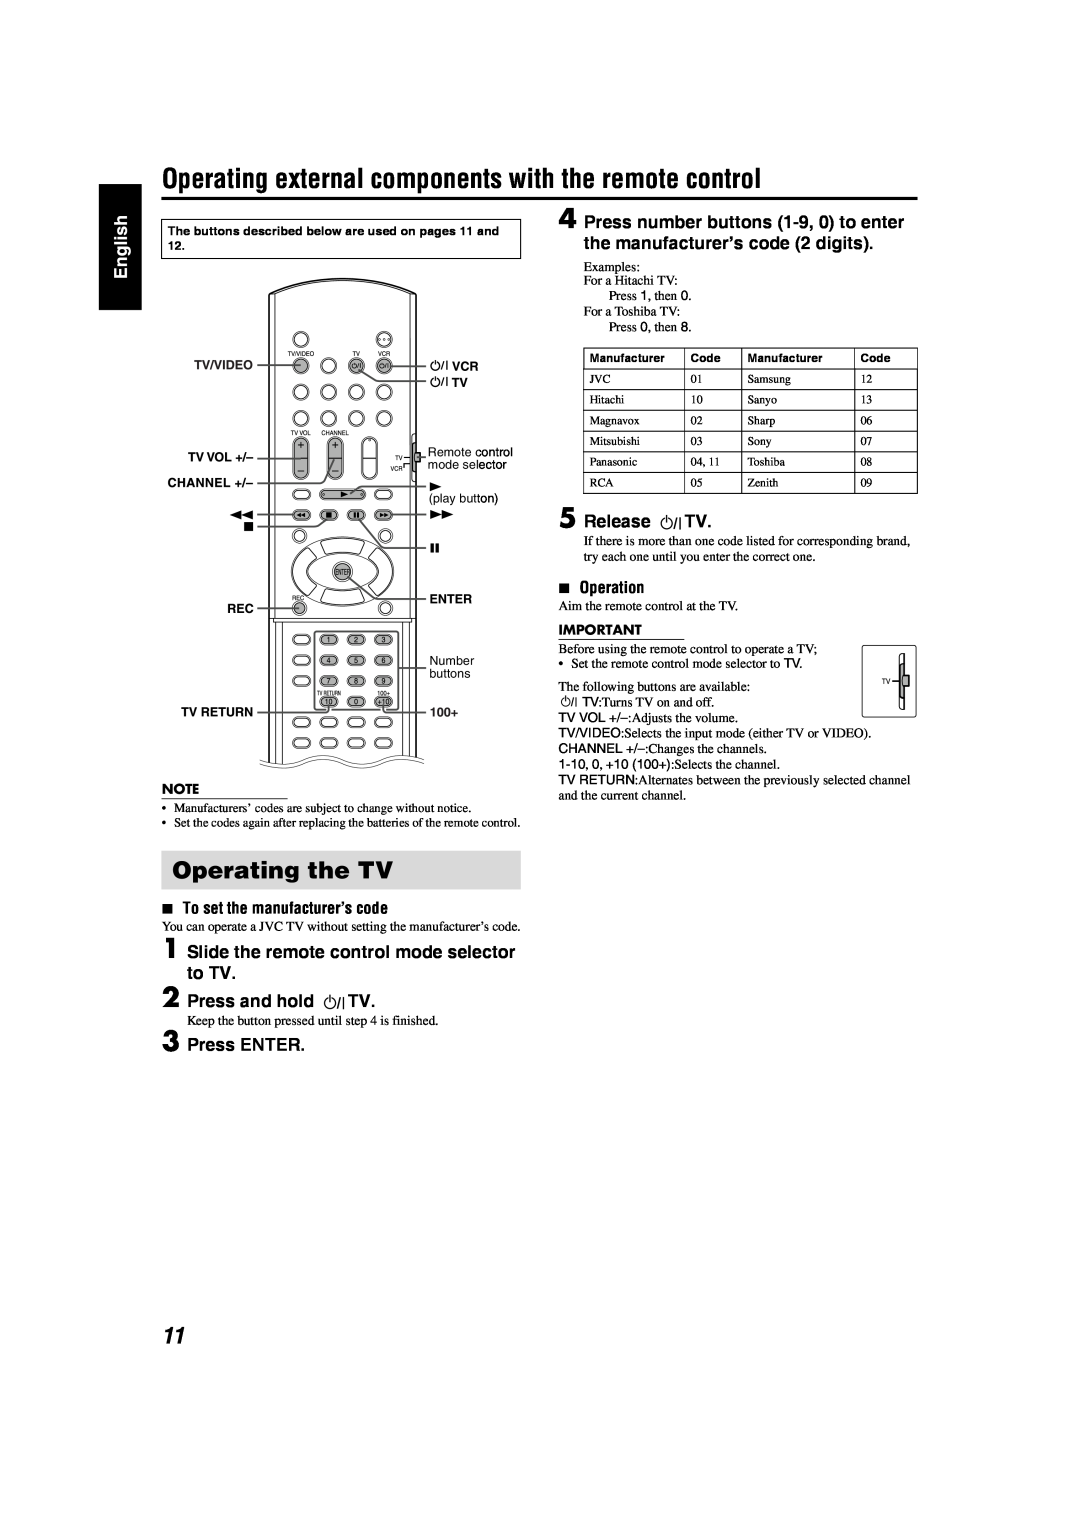 JVC GVT0141-003A manual Operating the TV, Slide the remote control mode selector to TV, Press and hold TV, Press ENTER 